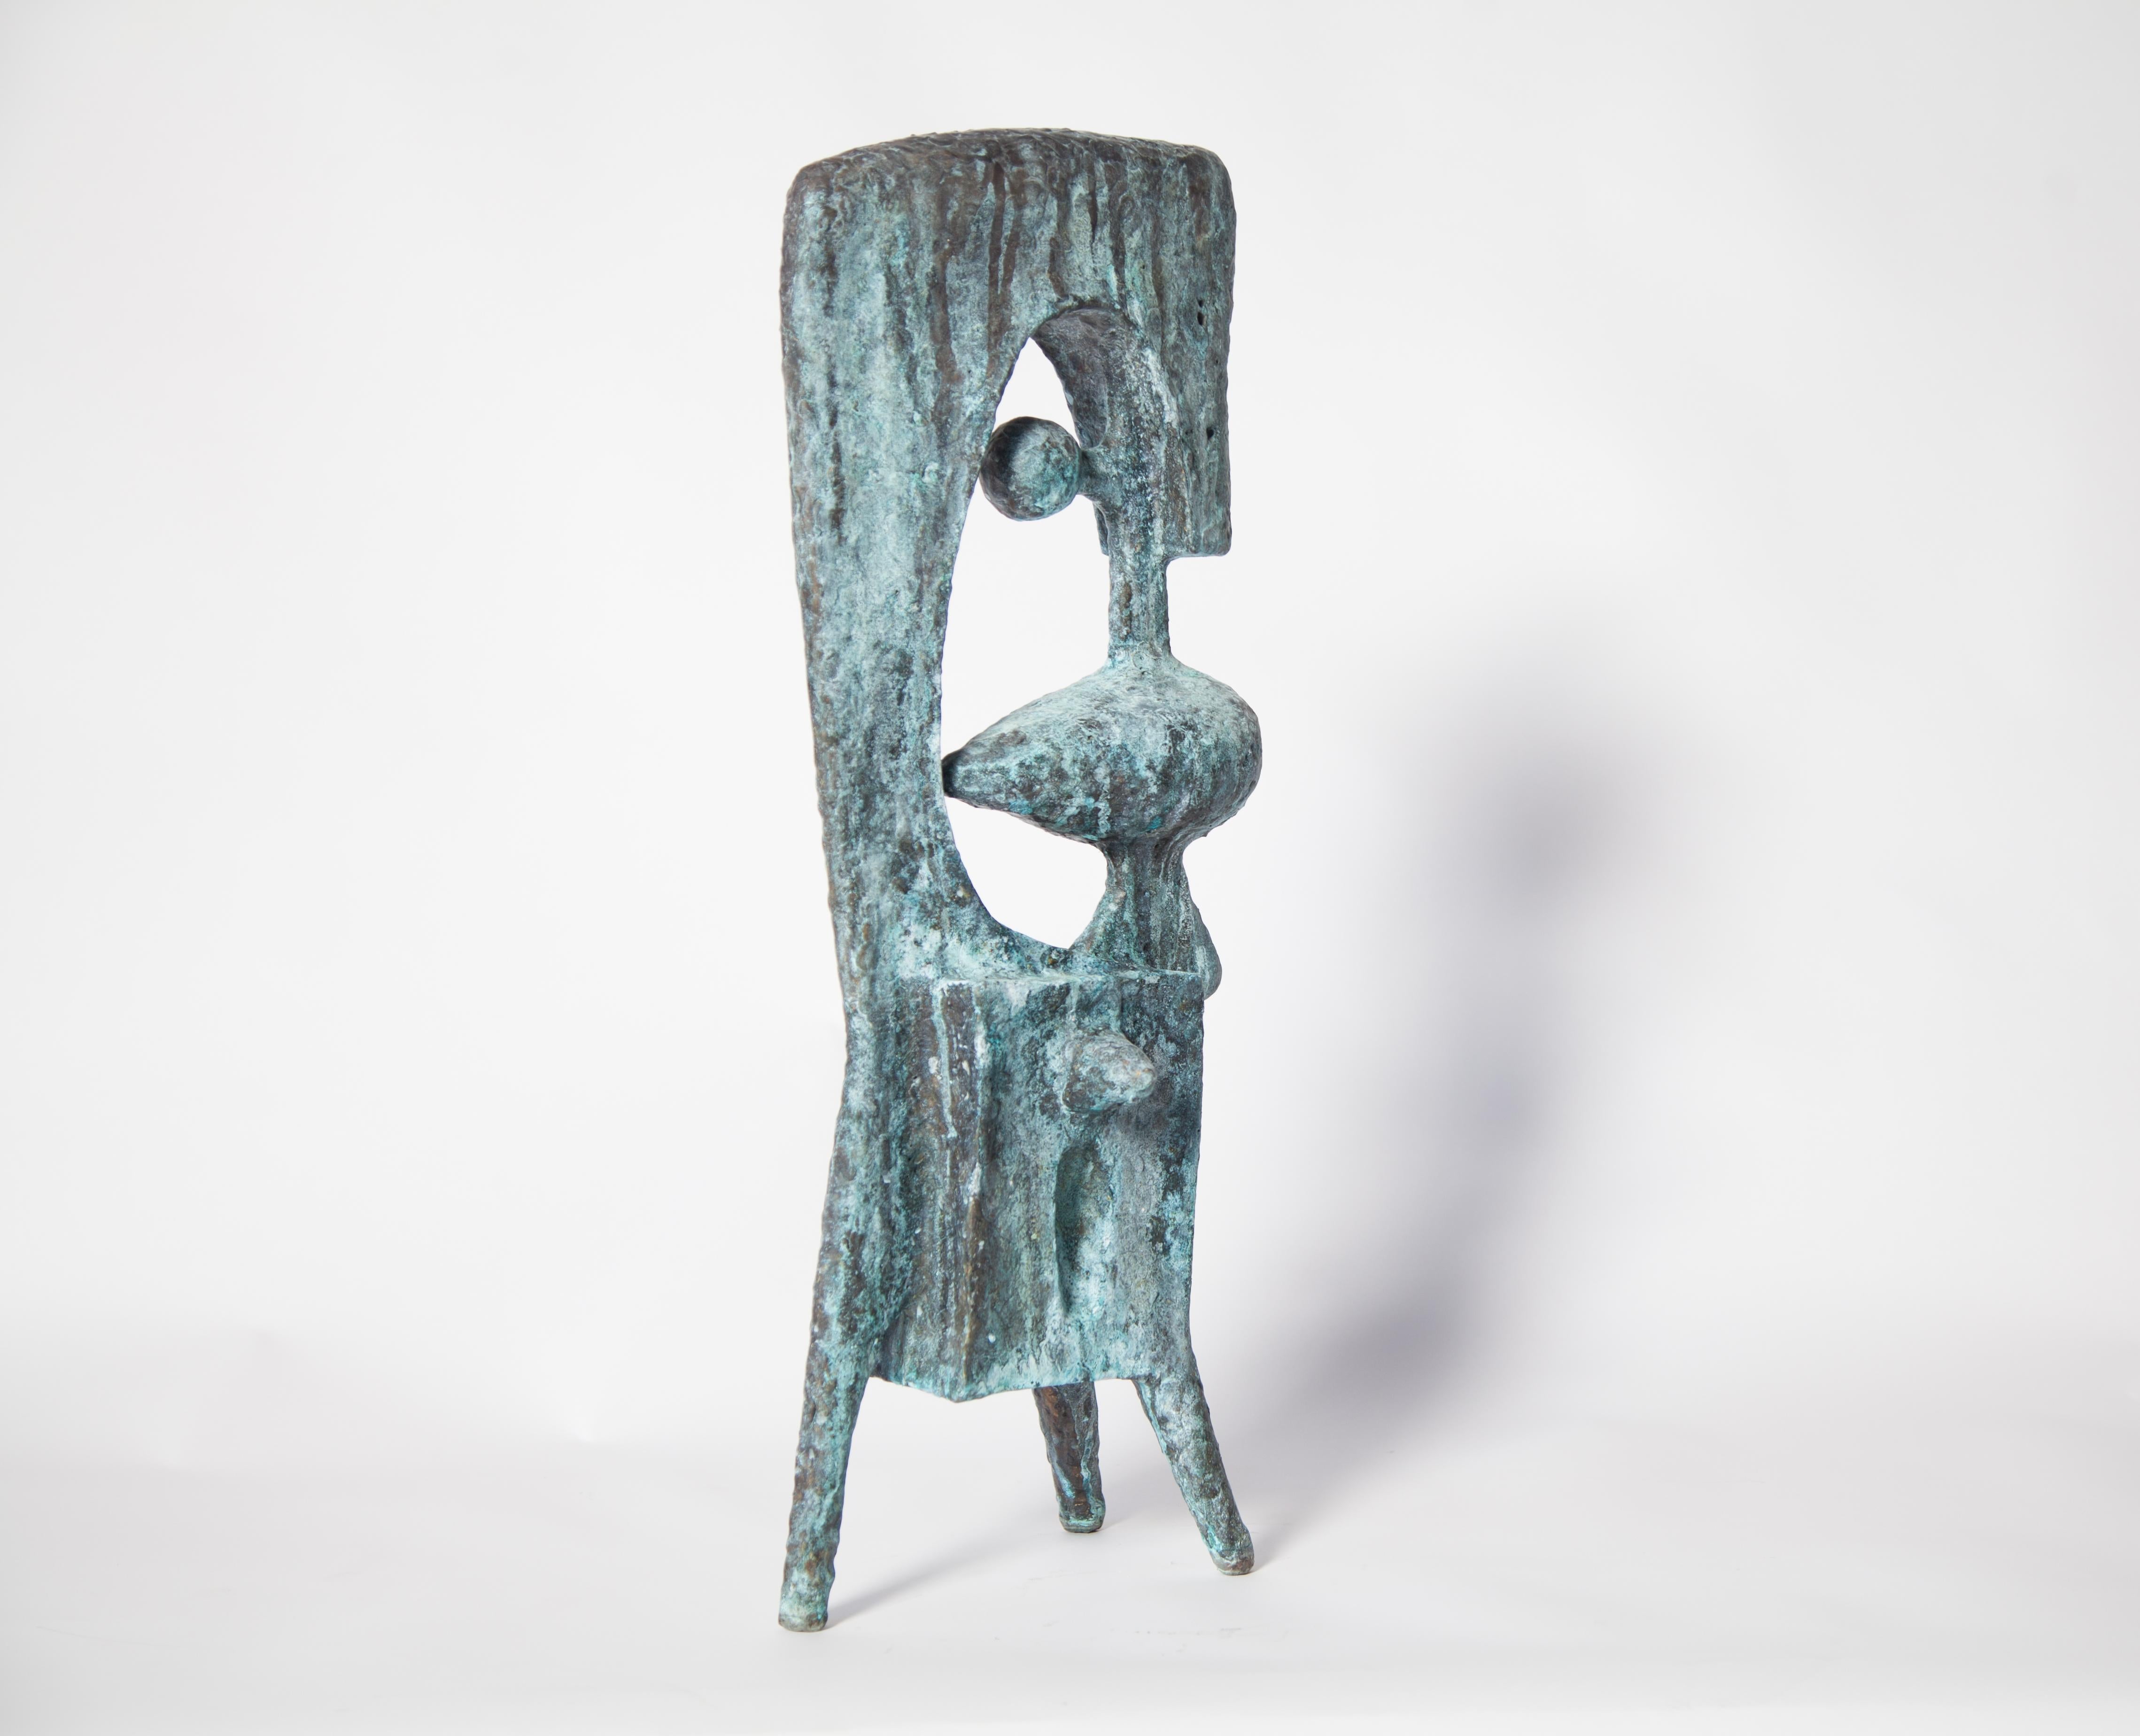 Contemporary bronze sculpture done by New York based Sculptor, BJ Las Ponas. To create a piece, Las Ponas cuts sheets of bronze and shapes them while still hot over an anvil. He melts bronze rods on top, welds them into place, and hammers. This